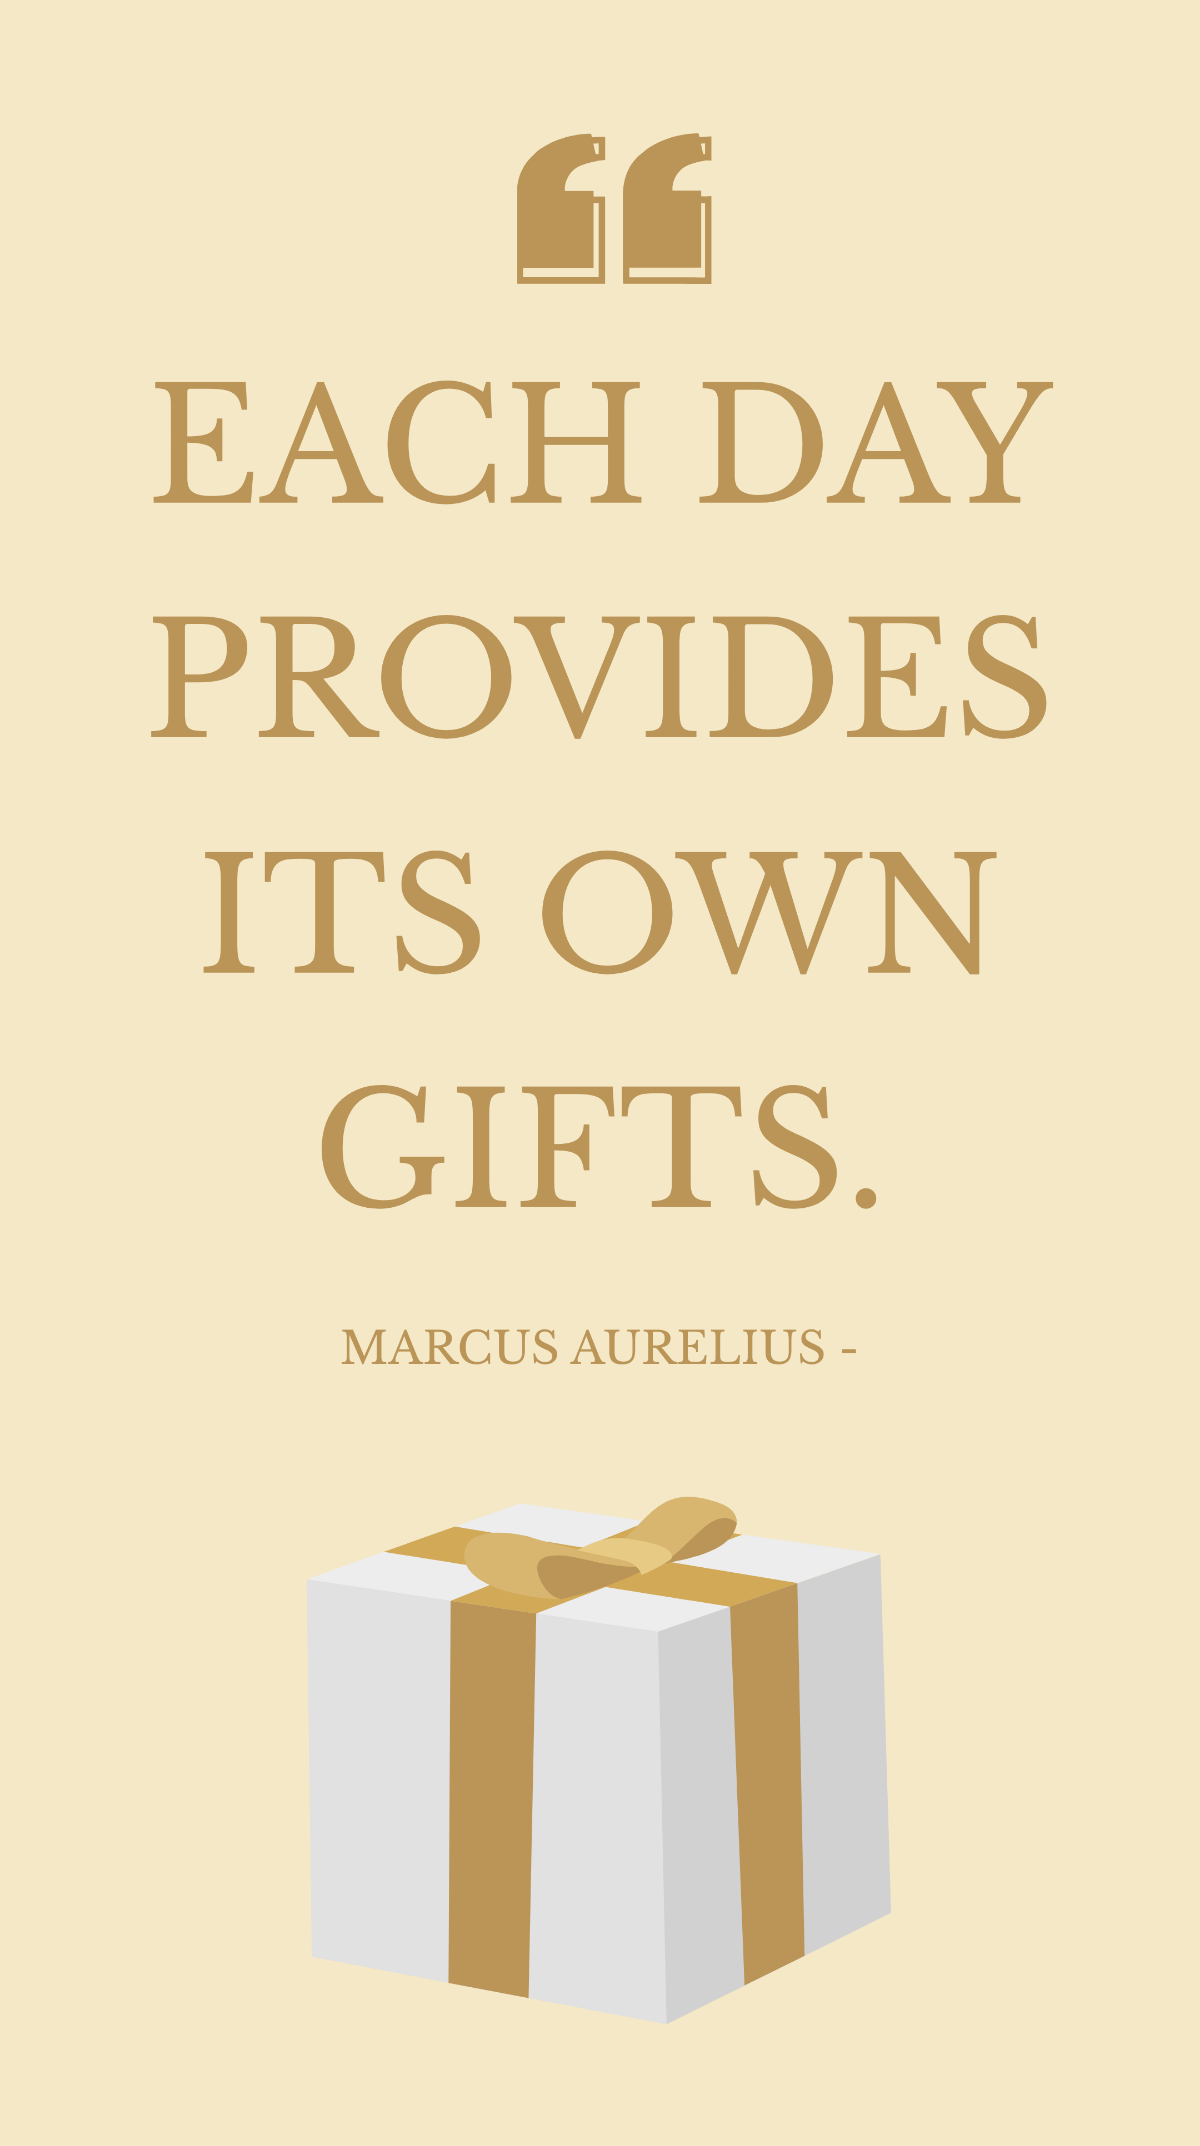 Marcus Aurelius - Each day provides its own gifts. Template